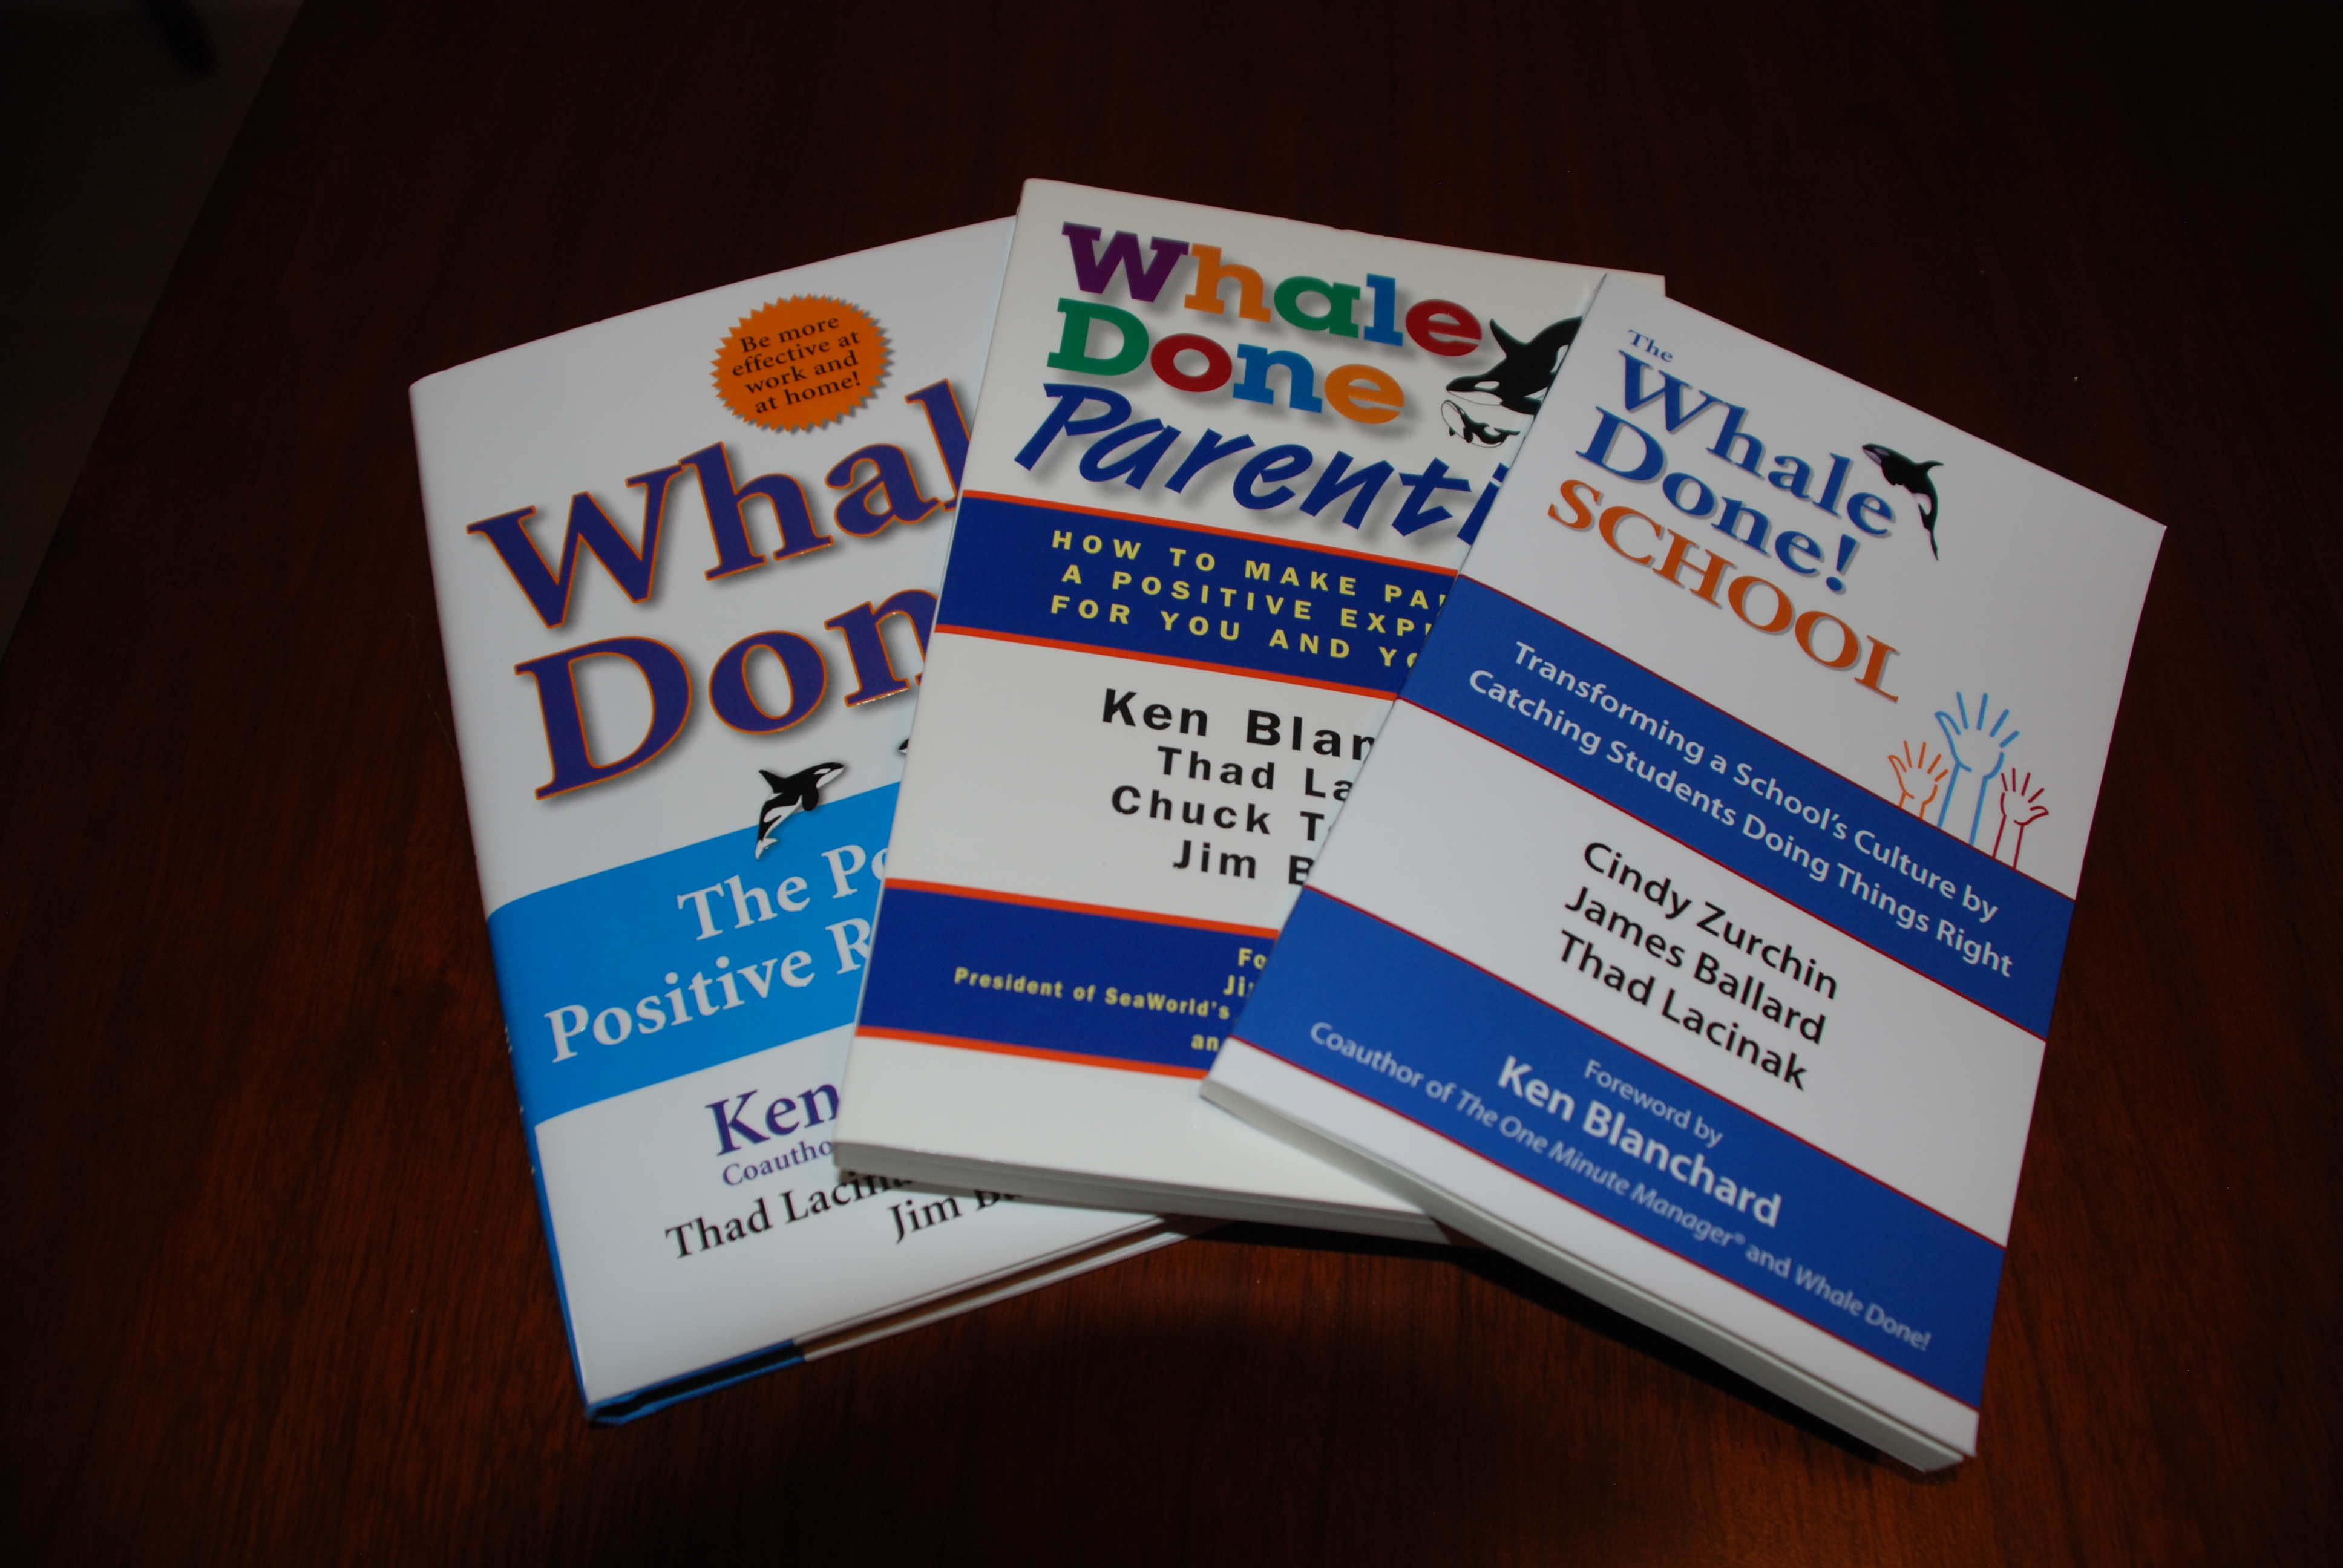 Book review of ‘Whale done! The Power of Positive Relationships’